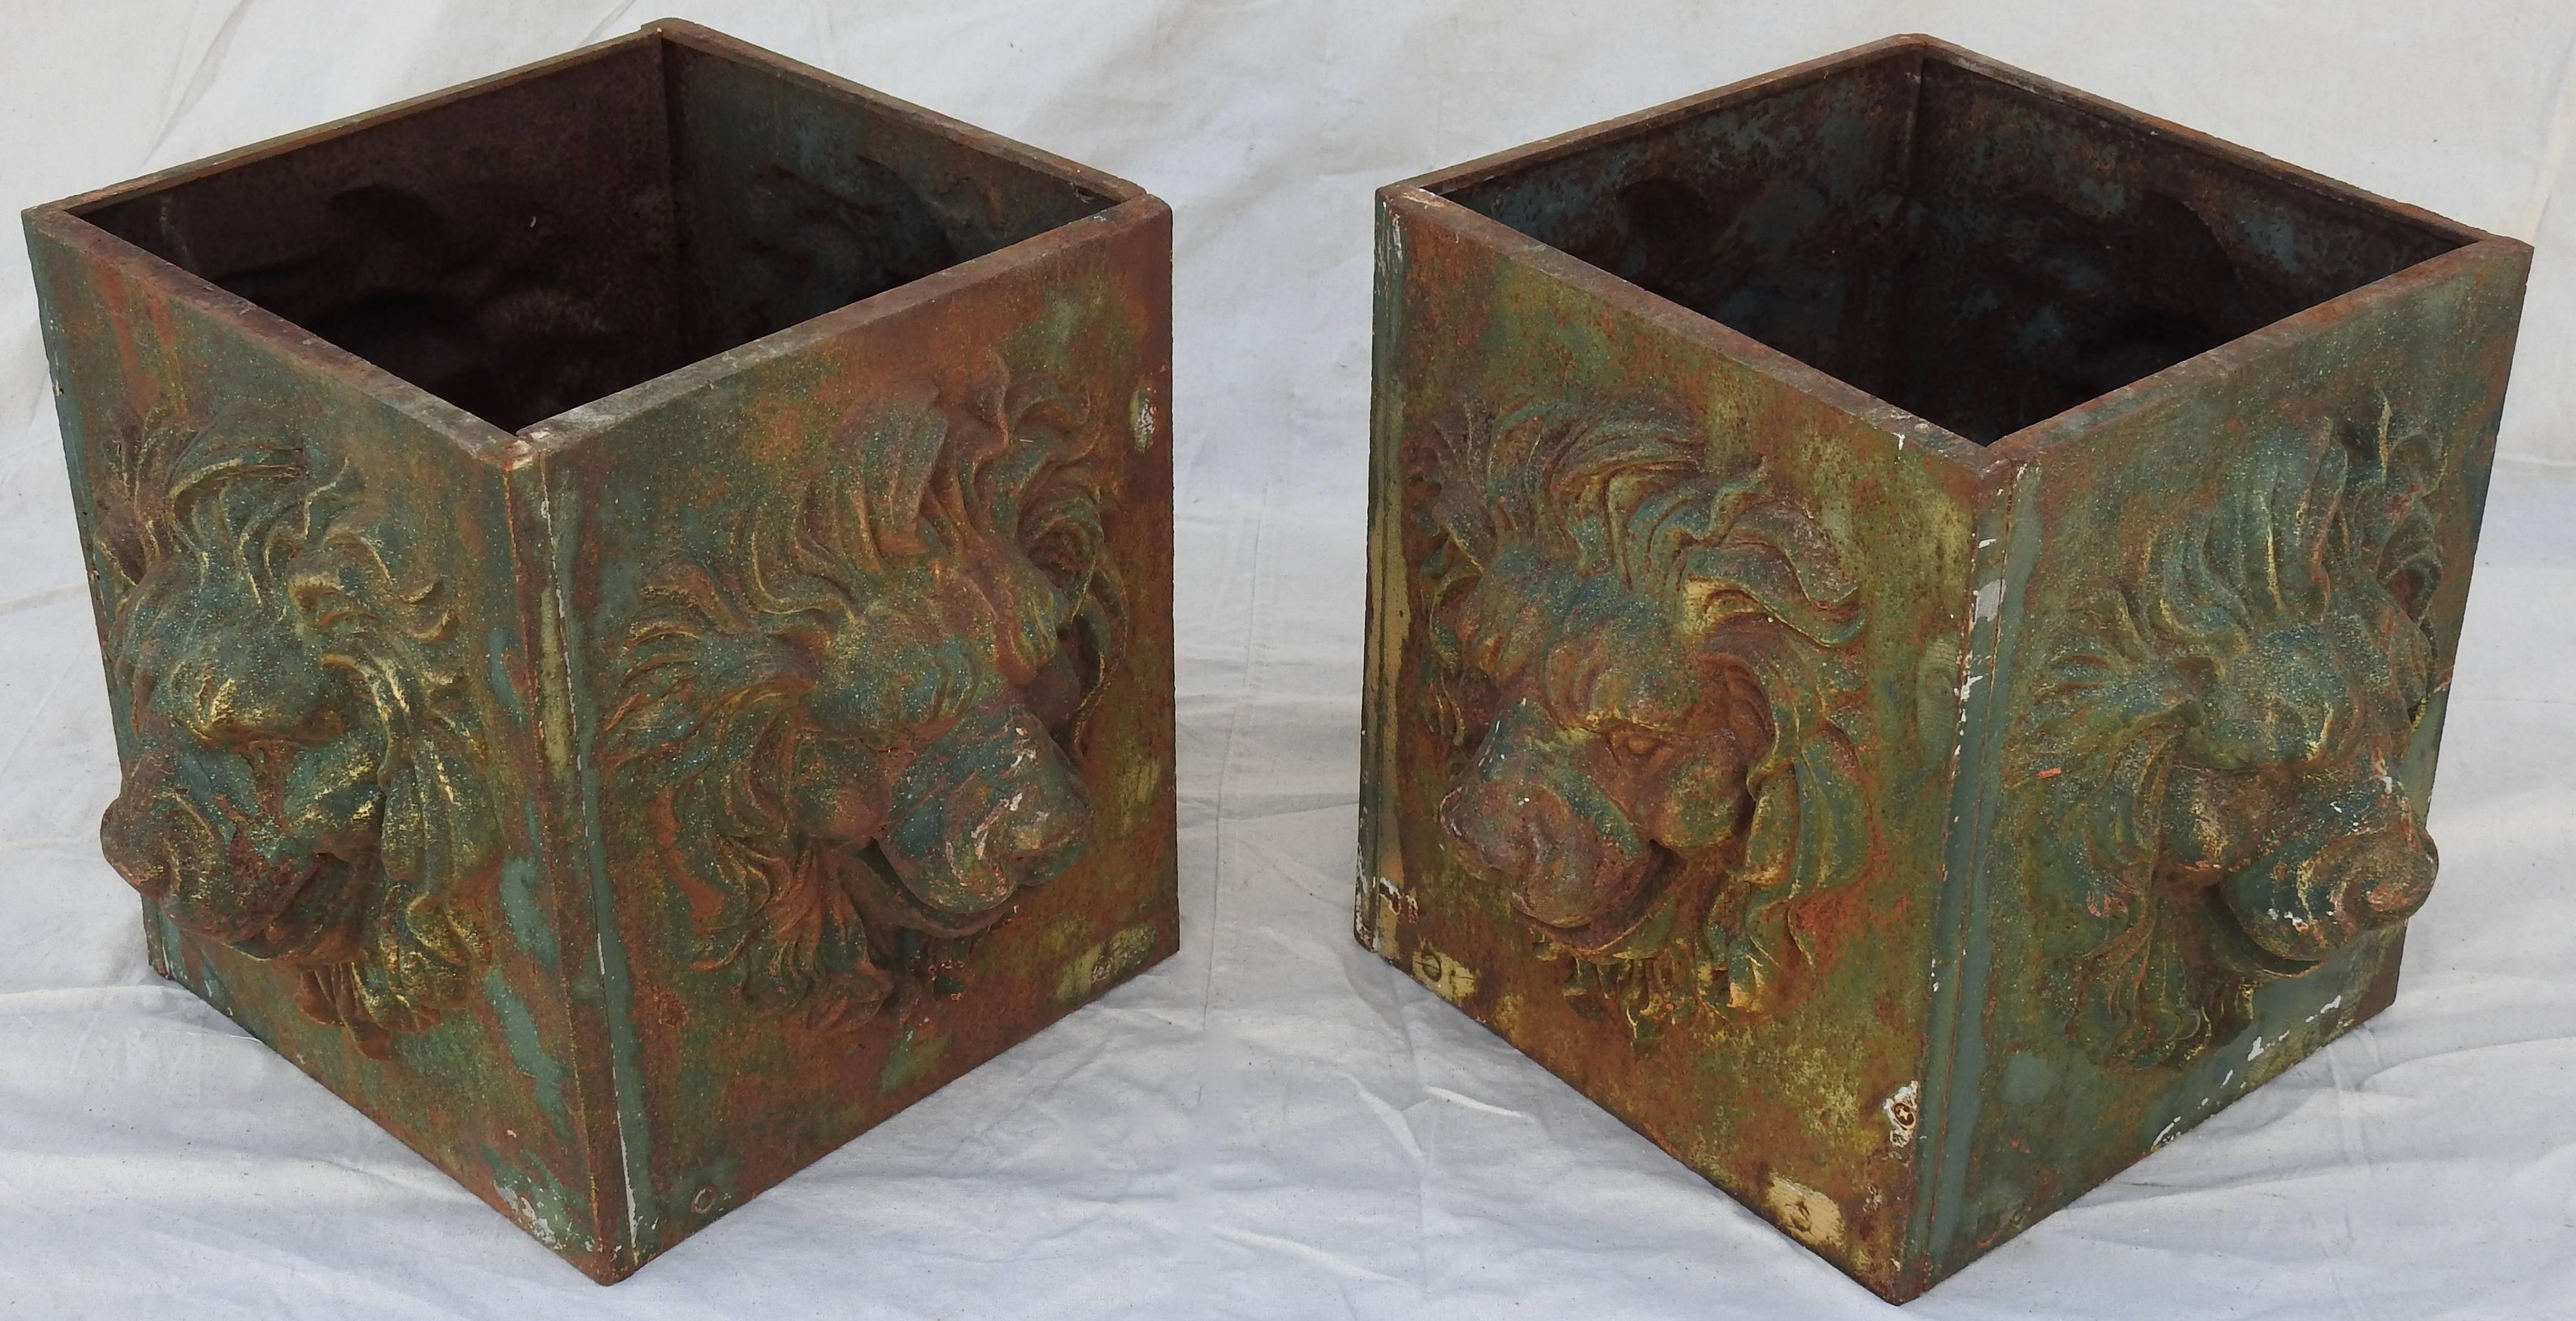 Neoclassical Revival Pair of Cast Iron Lions Head Planters, Midcentury